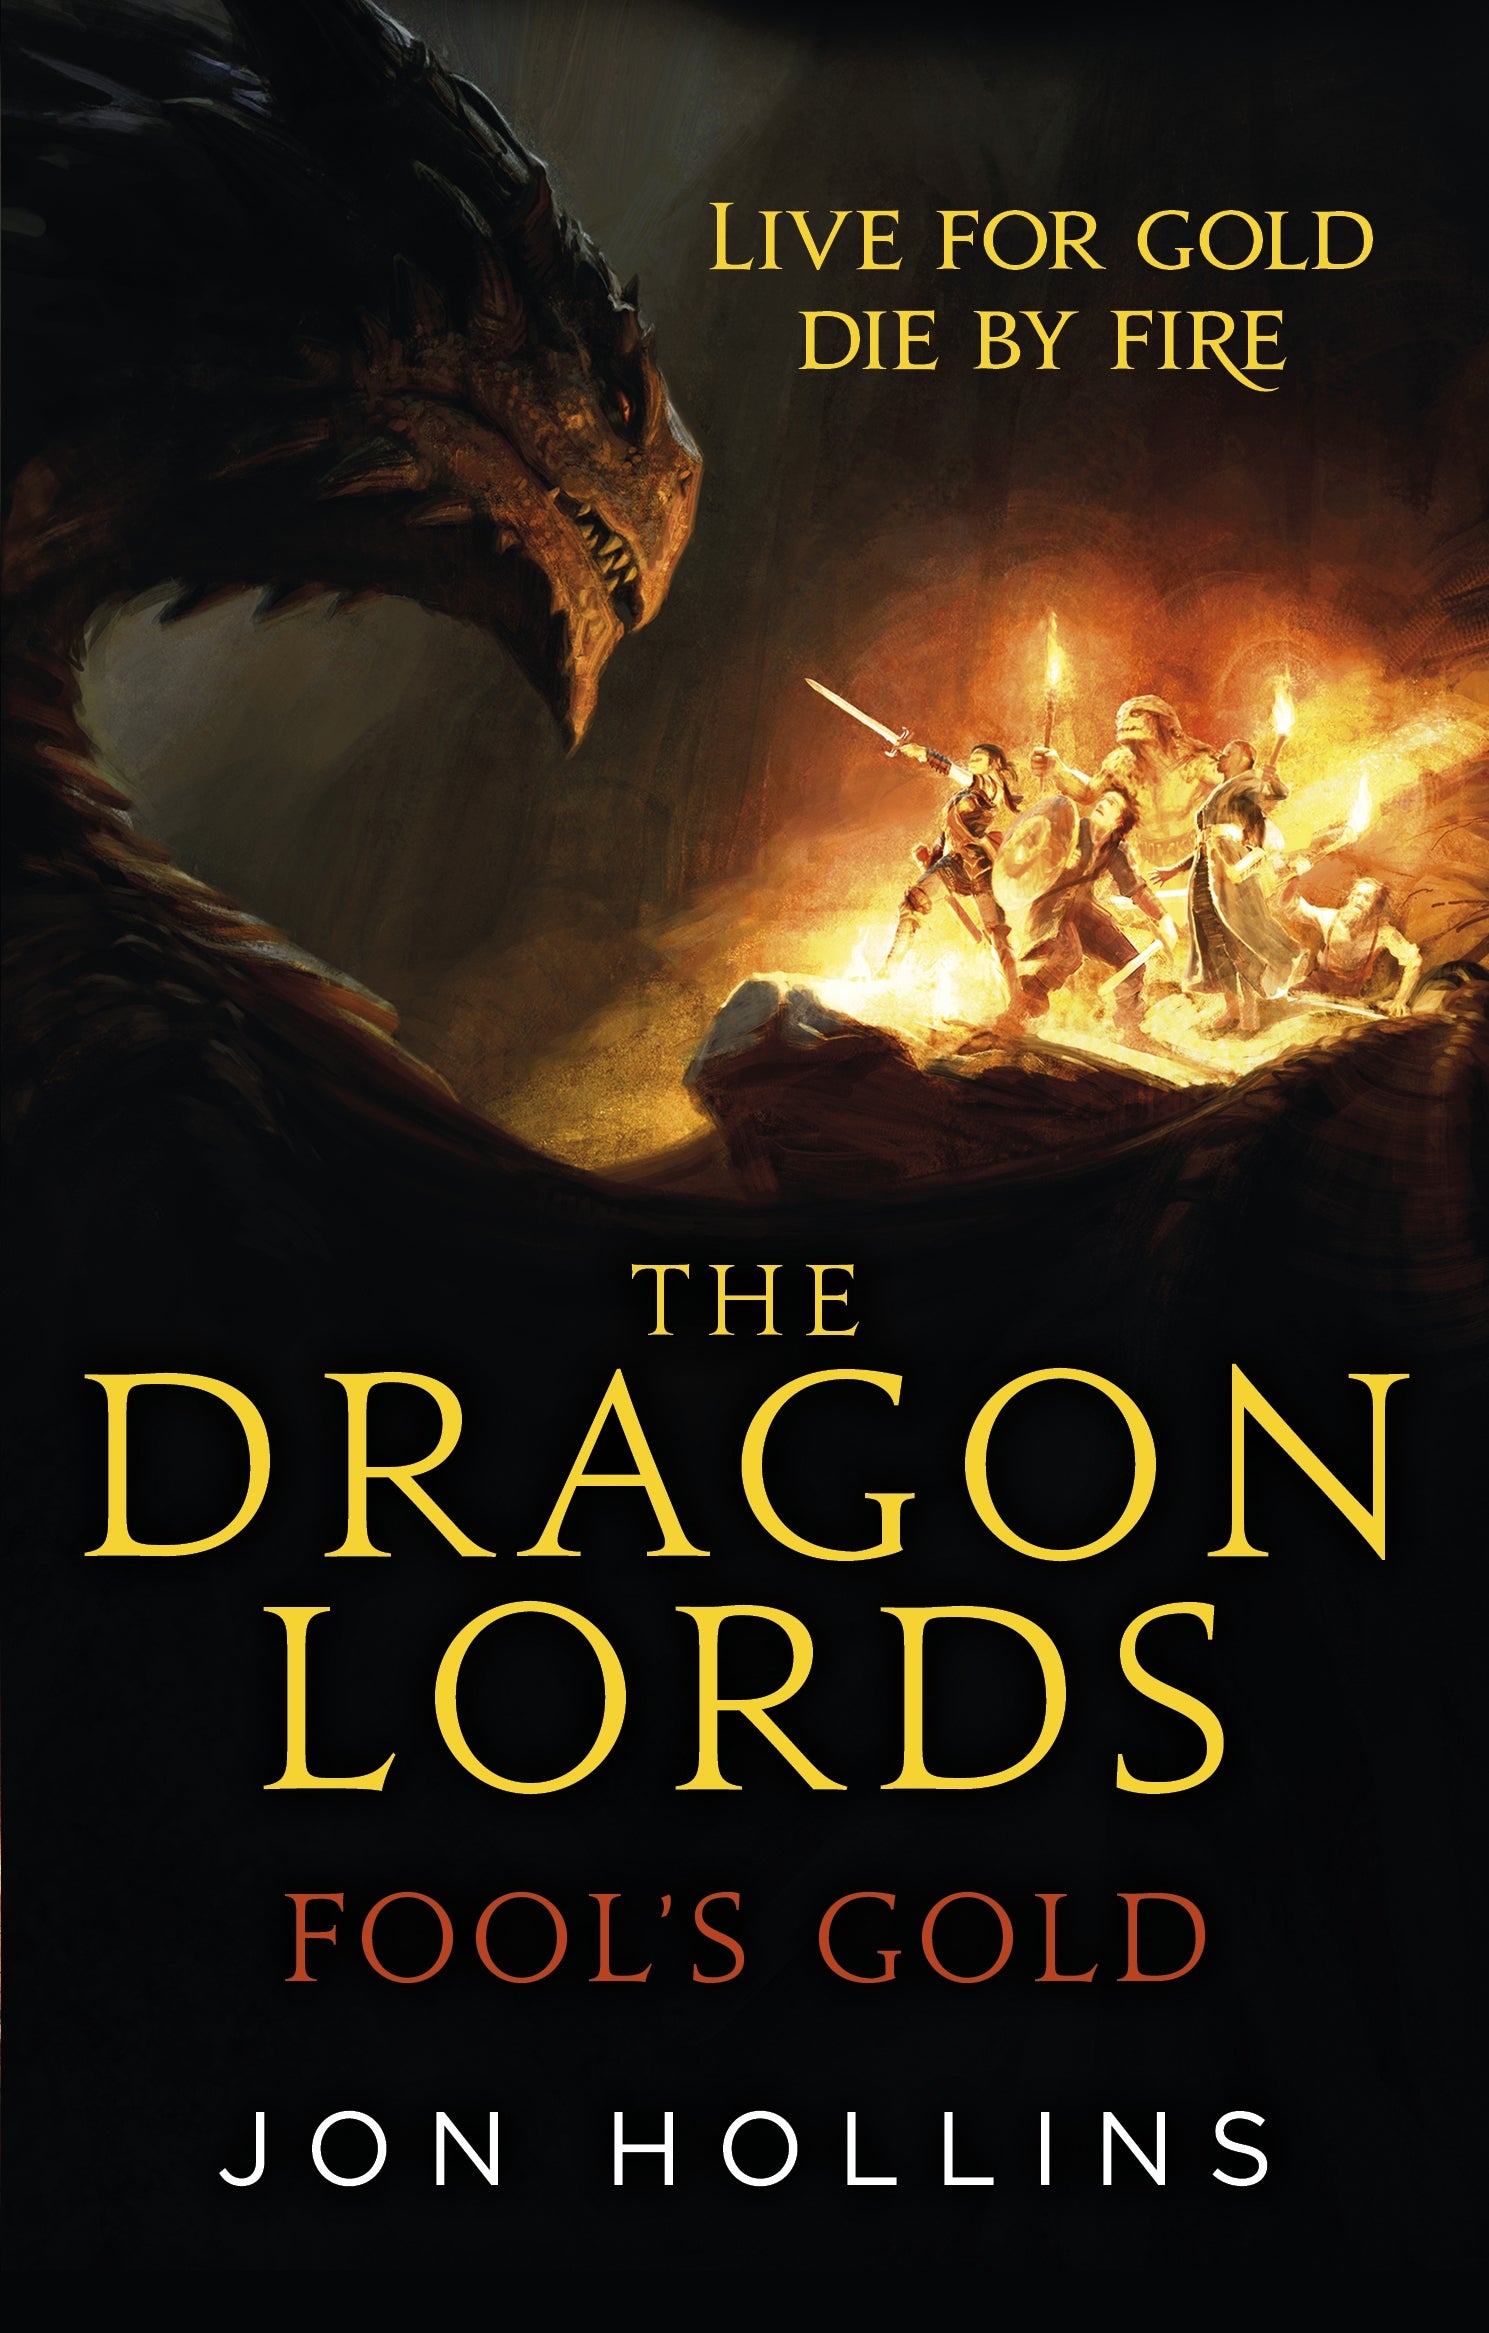 The Dragon Lords 1: Fool's Gold by Jon Hollins